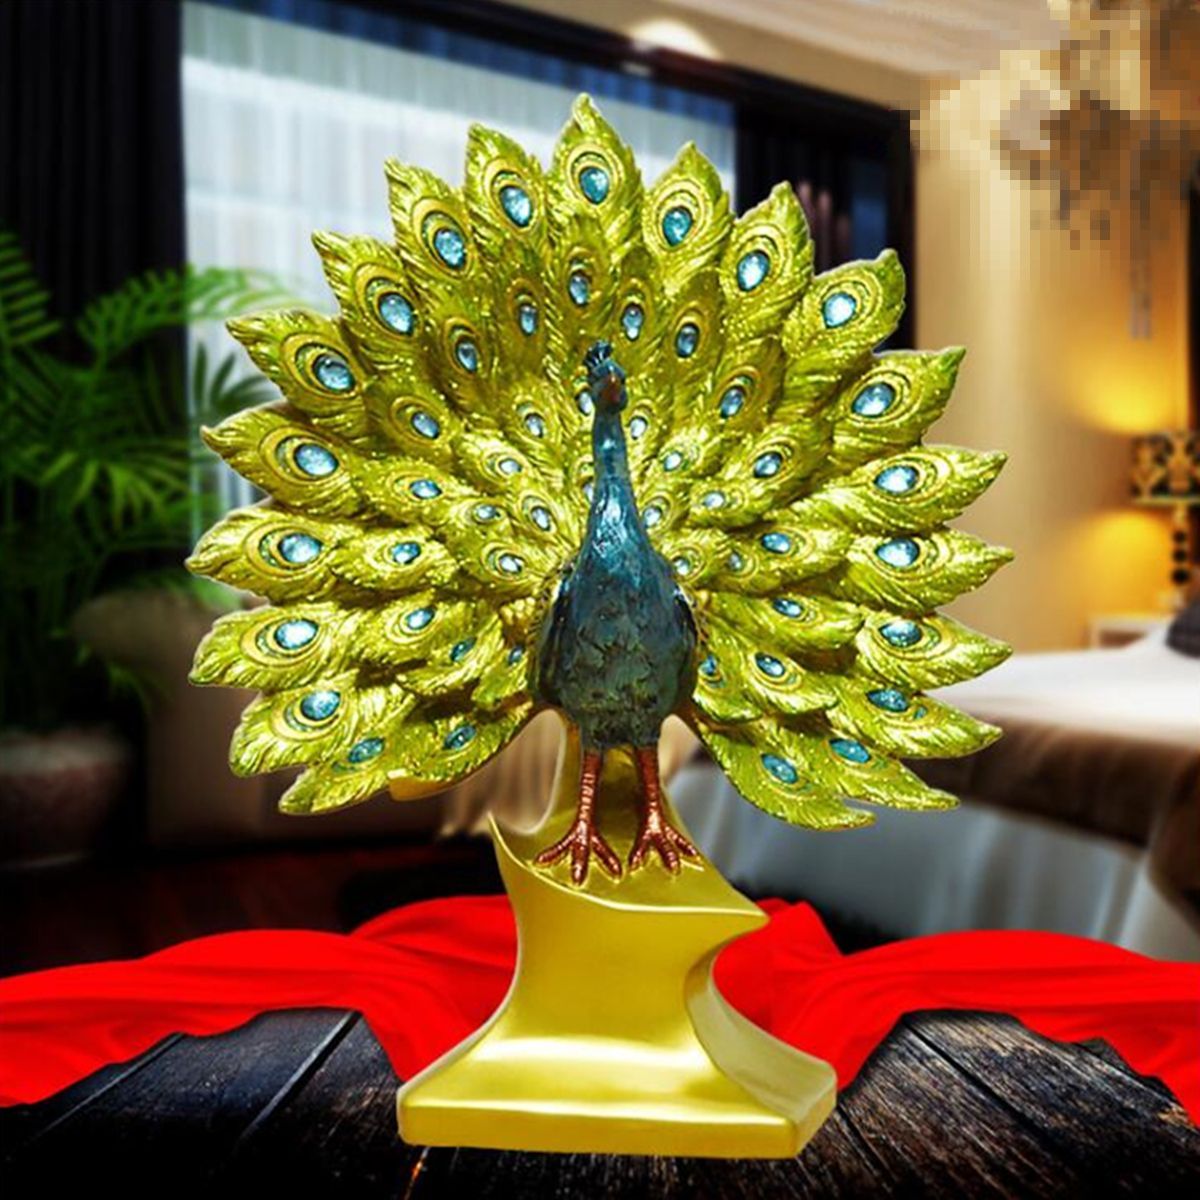 Creative-Peacock-Ornament-Resin-Figurine-Statue-Craft-Home-Decorations-Wedding-Gift-1477042